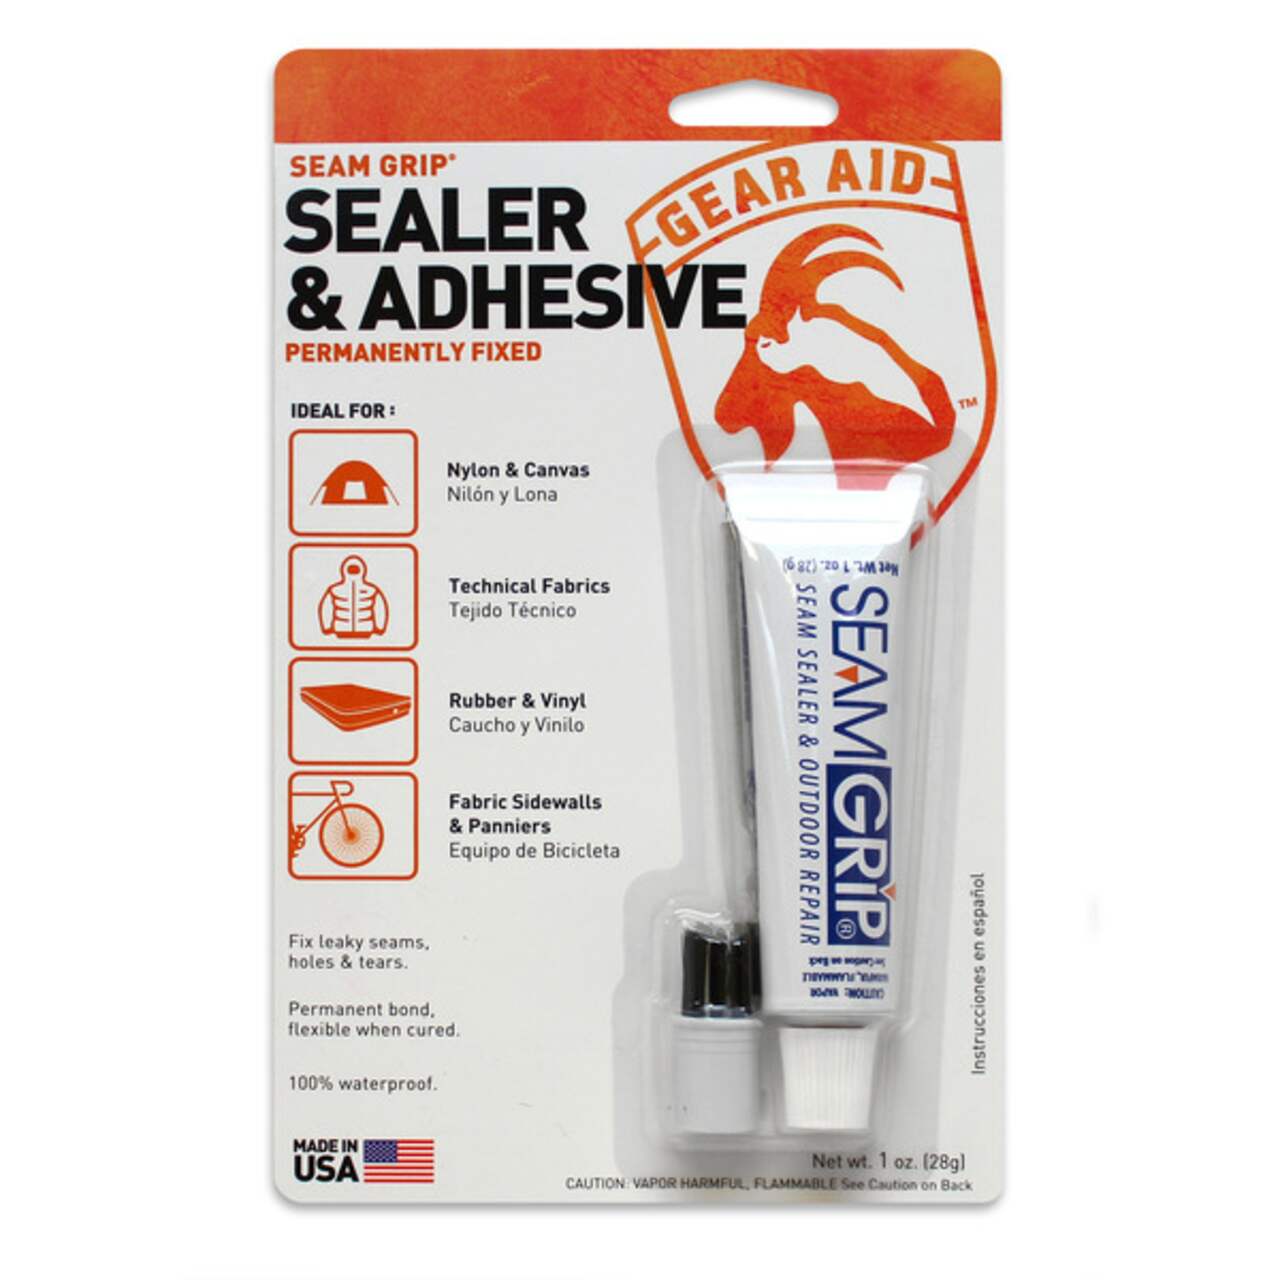 Gear Aid Seam Grip WP Waterproof Sealant and Adhesive for Tents